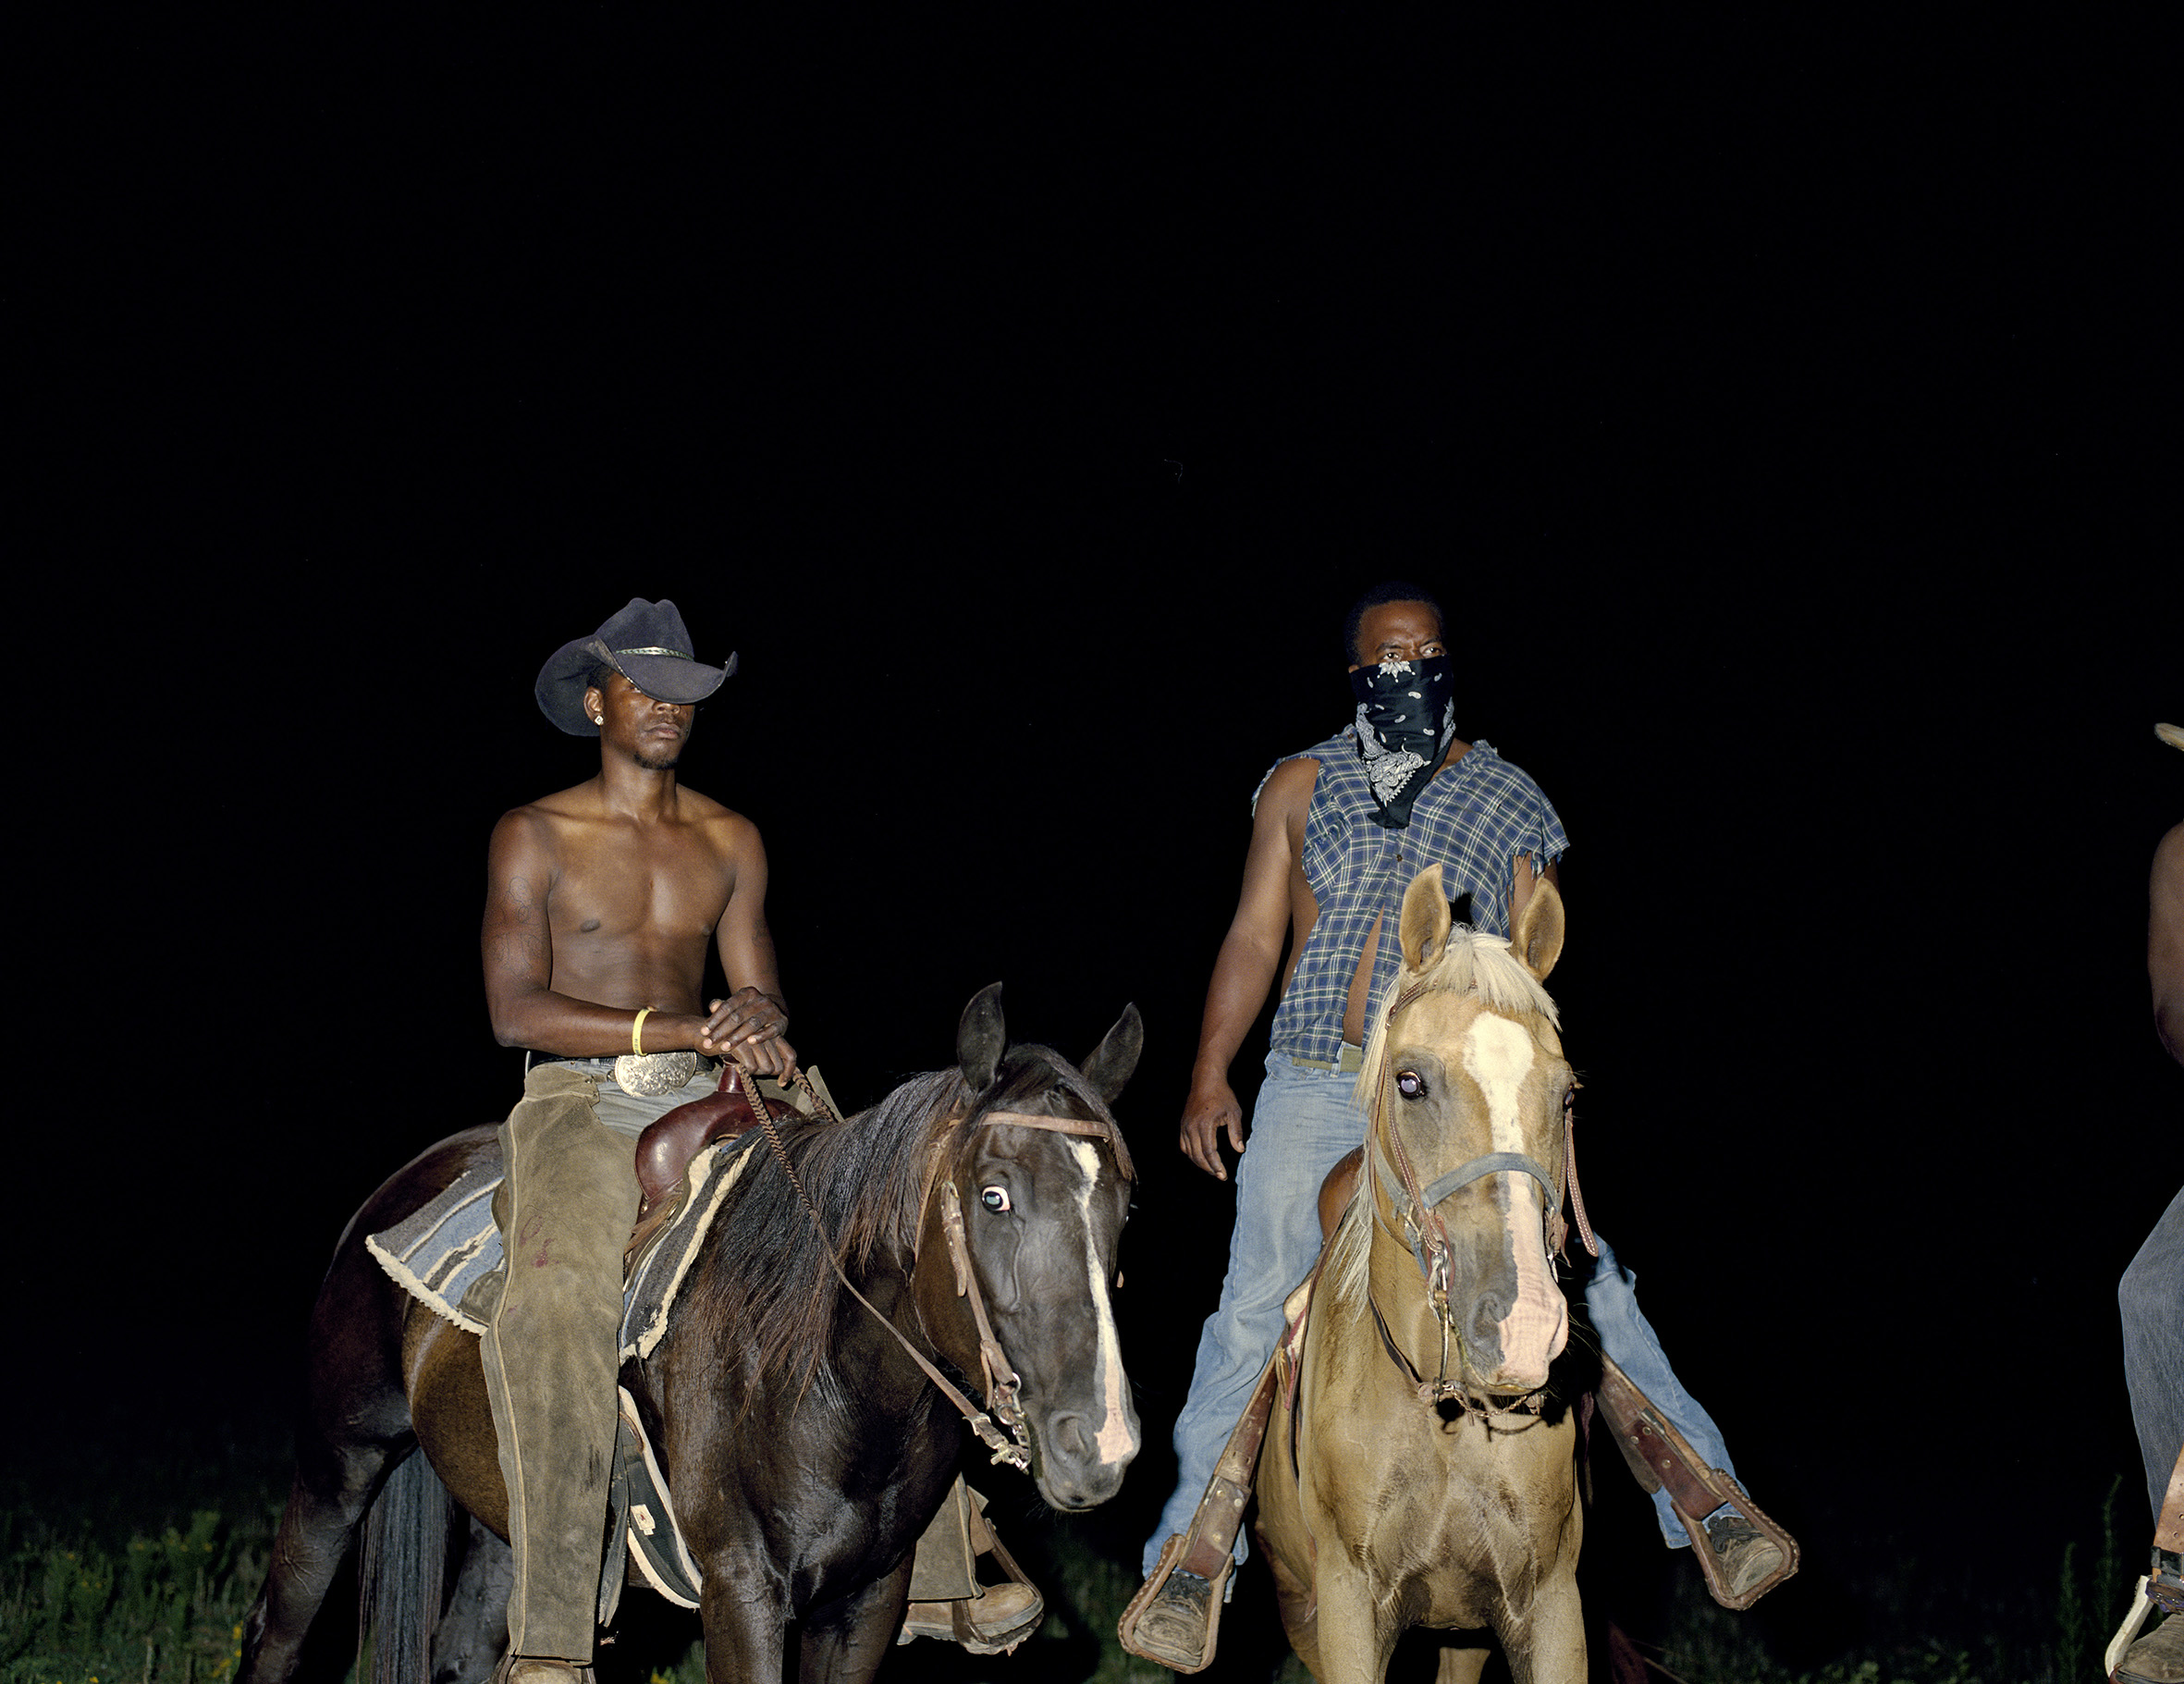 Two men in relaxed cowboy style riding on separate horses. The picture is taken in darkness with a powerful flash.